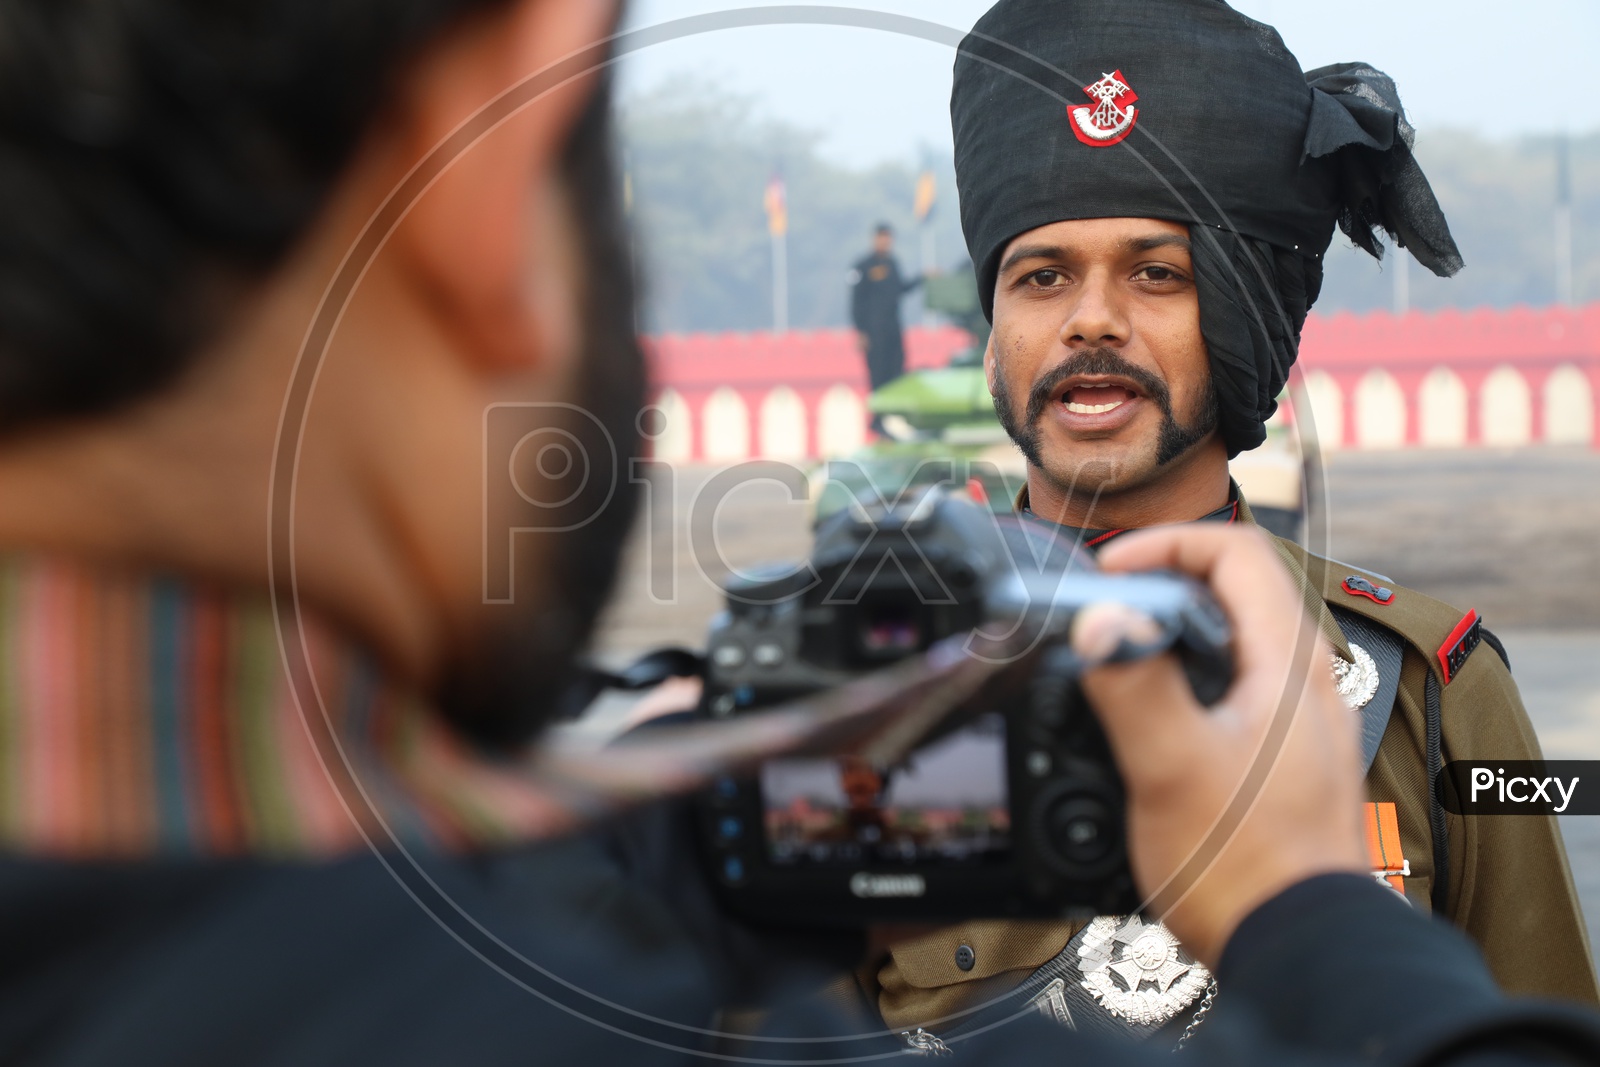 Photographer taking Photos of Indian Army Soldier